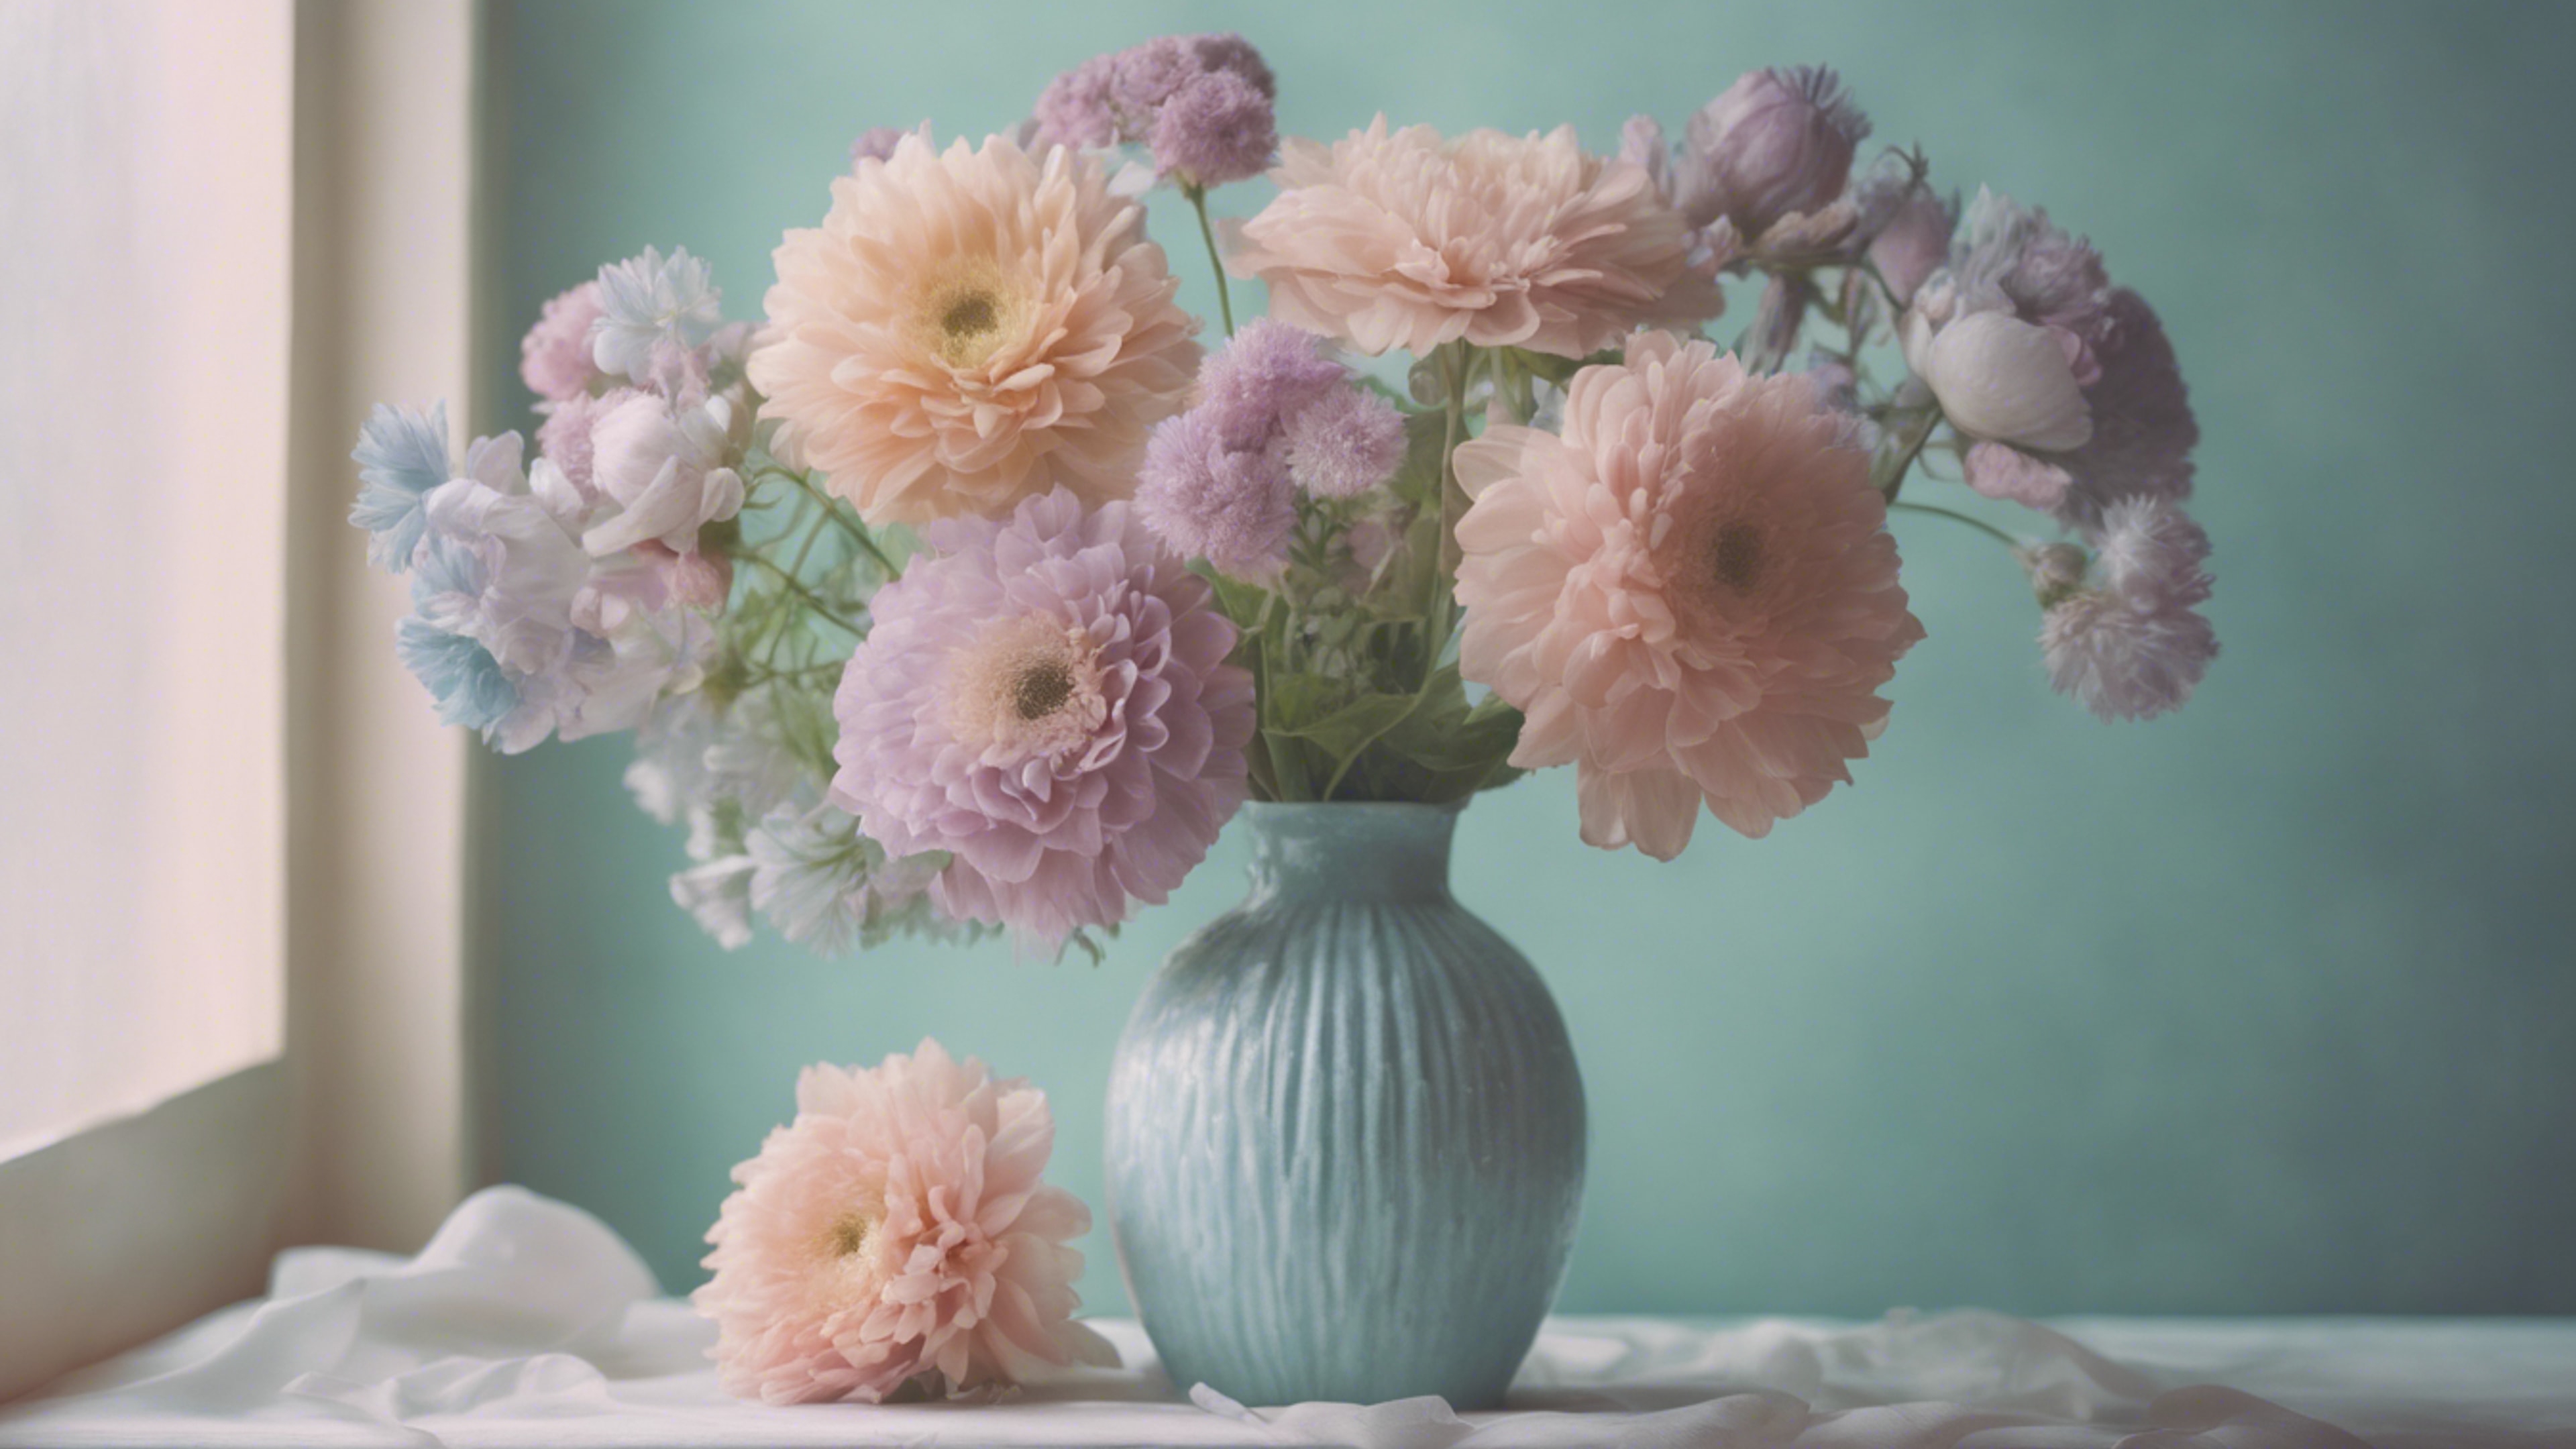 A pastel toned still-life painting featuring cool pastel colored flowers in a vase. Tapeta[6e1327f815a34bc2b32b]